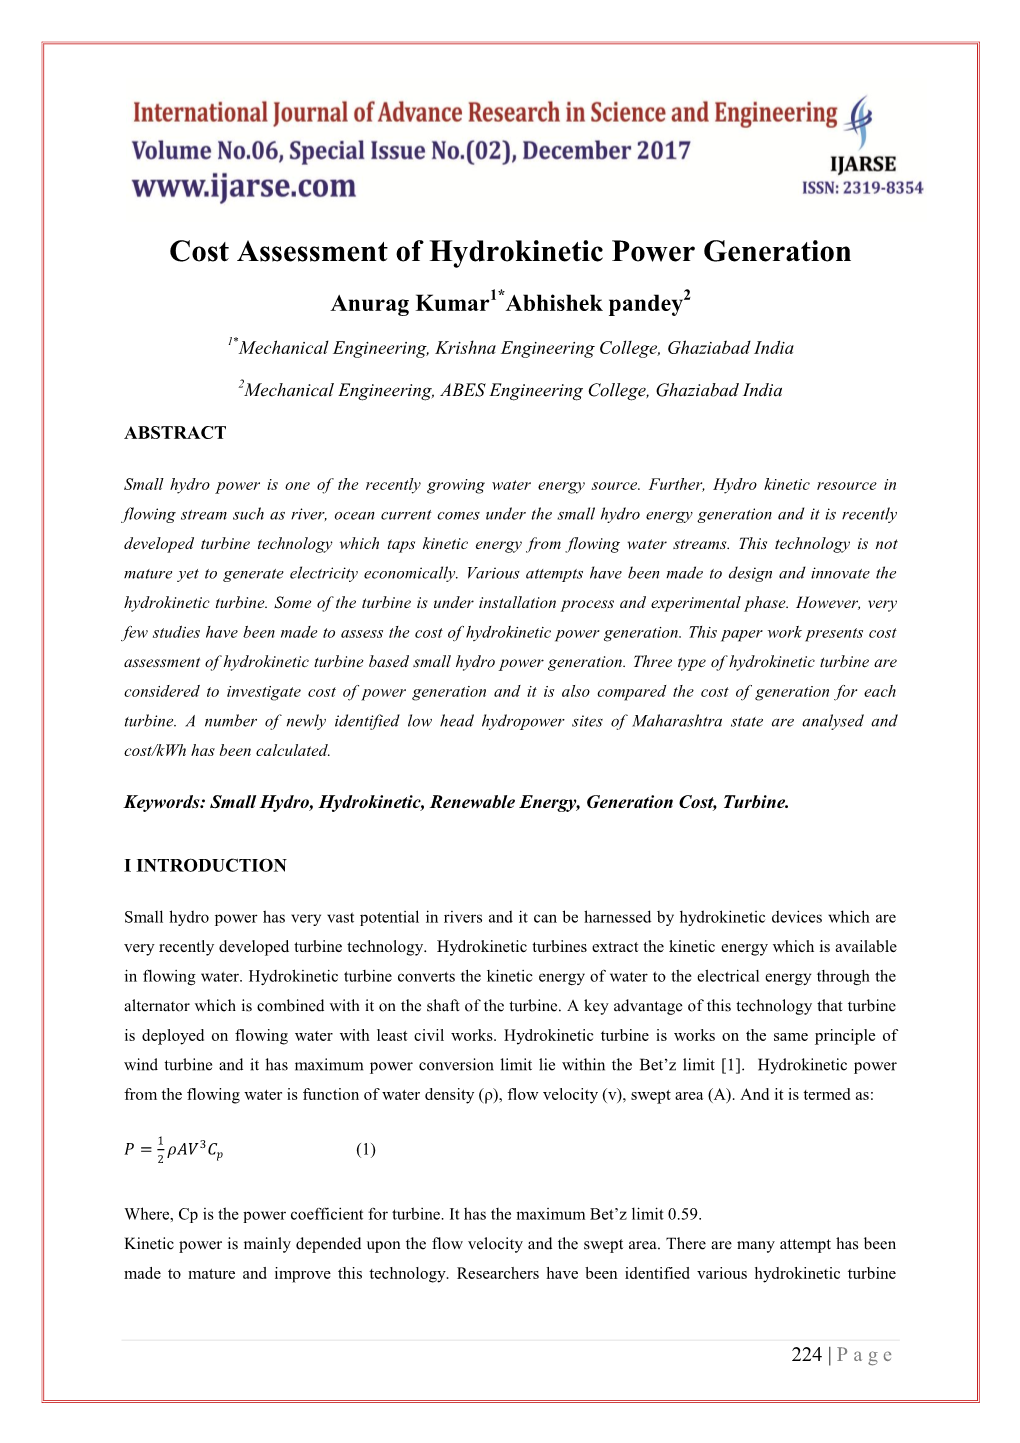 Cost Assessment of Hydrokinetic Power Generation